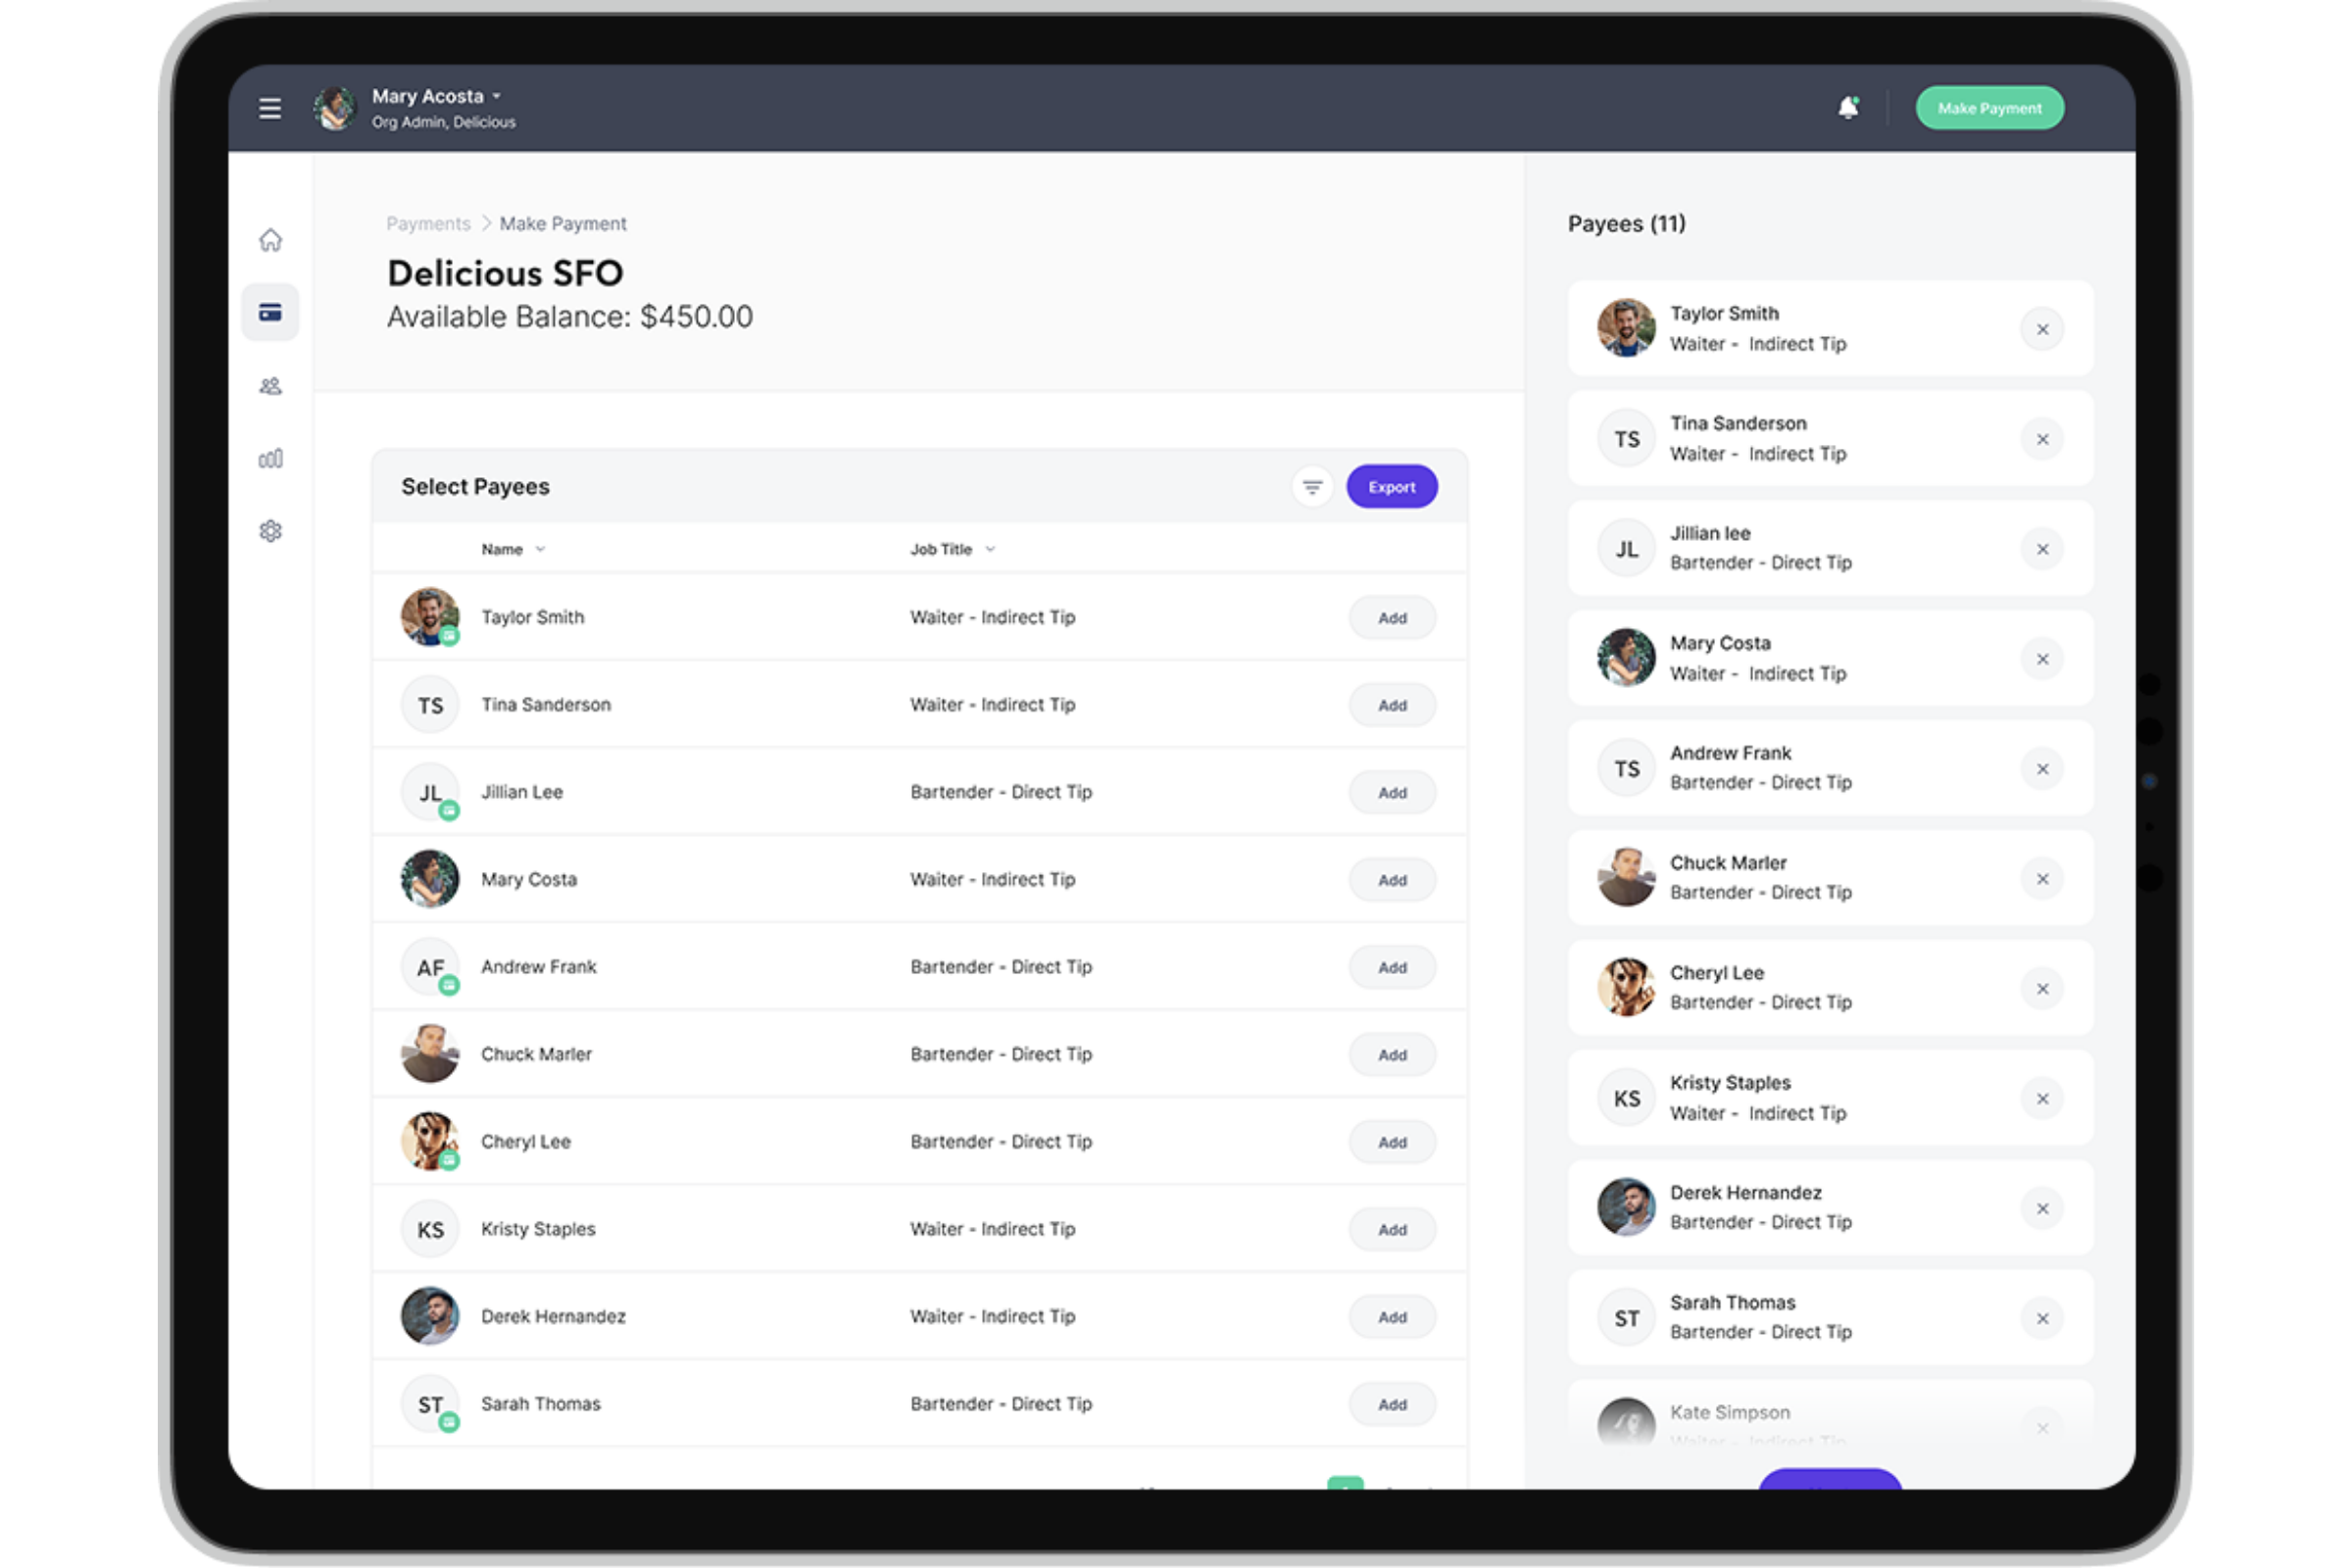 KickFin Software - Kickfin dashboard: After setting up your locations, you can see all employees at each location. When you're ready to distribute tips, you'll simply select the employees who worked that shift.